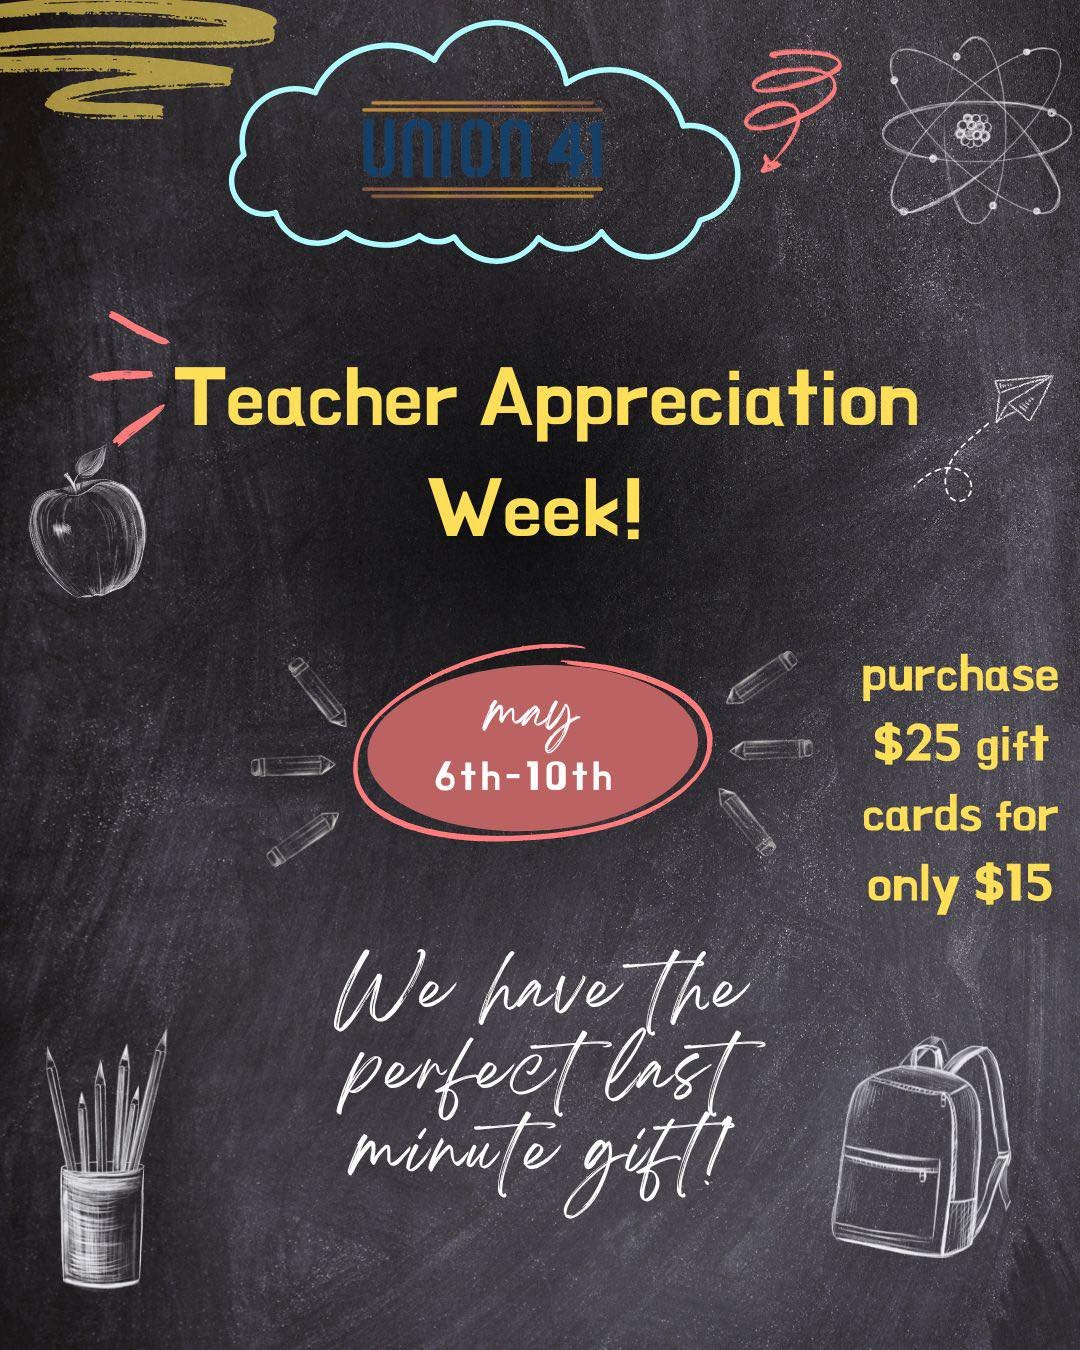 Show some love to your favorite teacher!

We will be offering $25 gift cards for only $15! 

Use code: GCTEACHER at checkout 

Gift card link: 
https://www.toasttab.com/union-41-171-piedmont-ave/giftcards

#teacher #teacherappreciationweek #teacherli